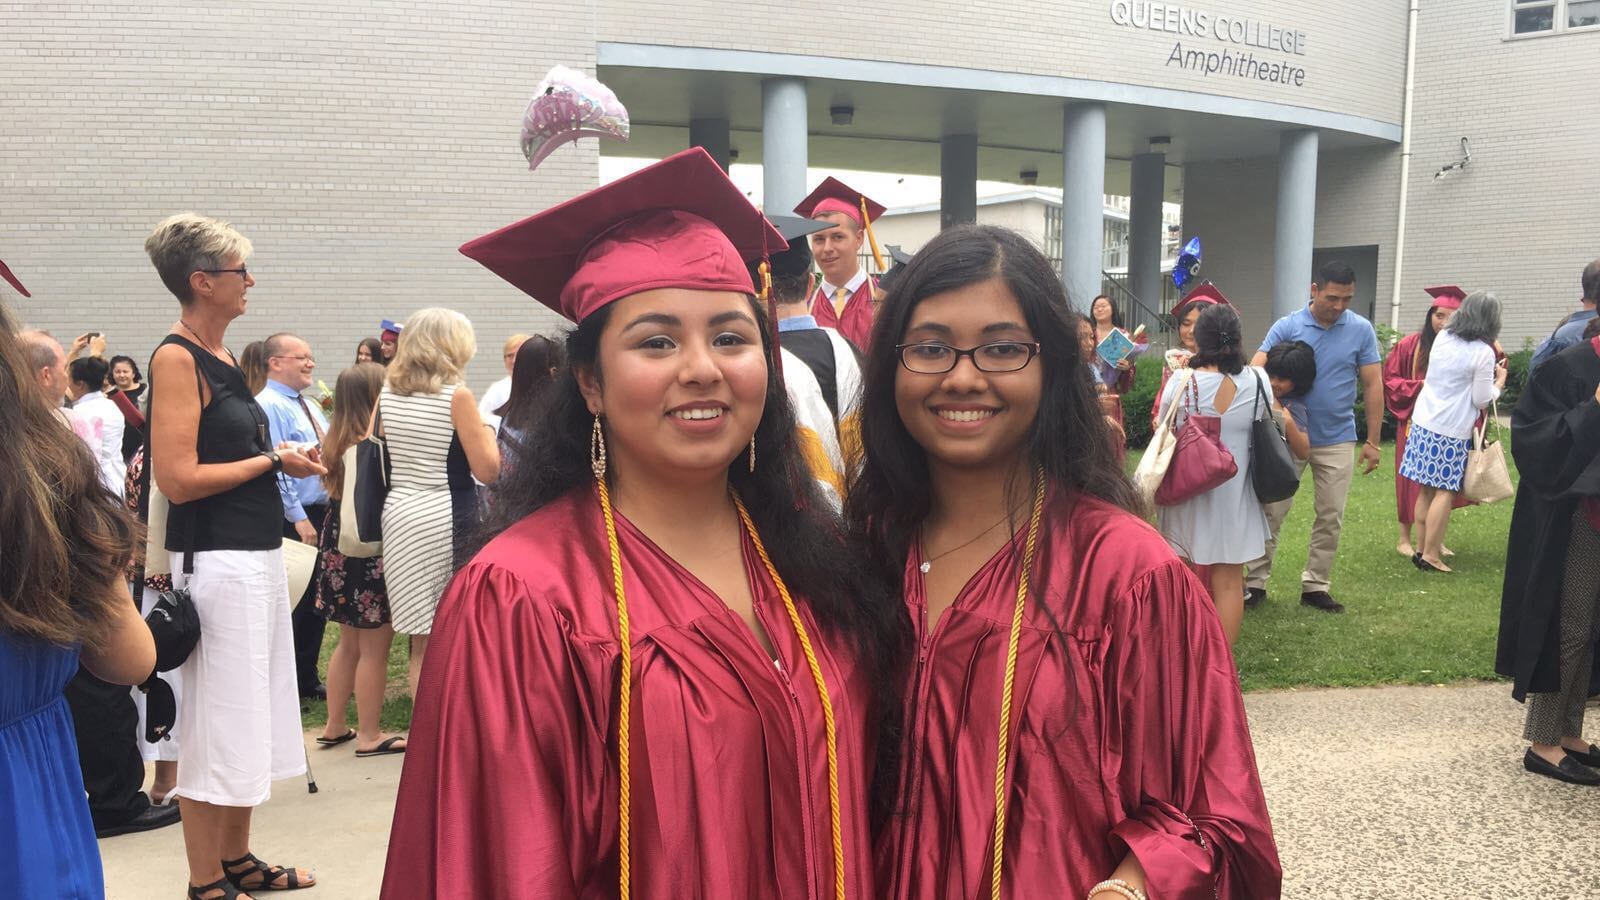 Mehrose Ahmad and Sumaita Hasan ran the Townsend Harris High School newspaper, The Classic, which recently won a national student-journalism award.